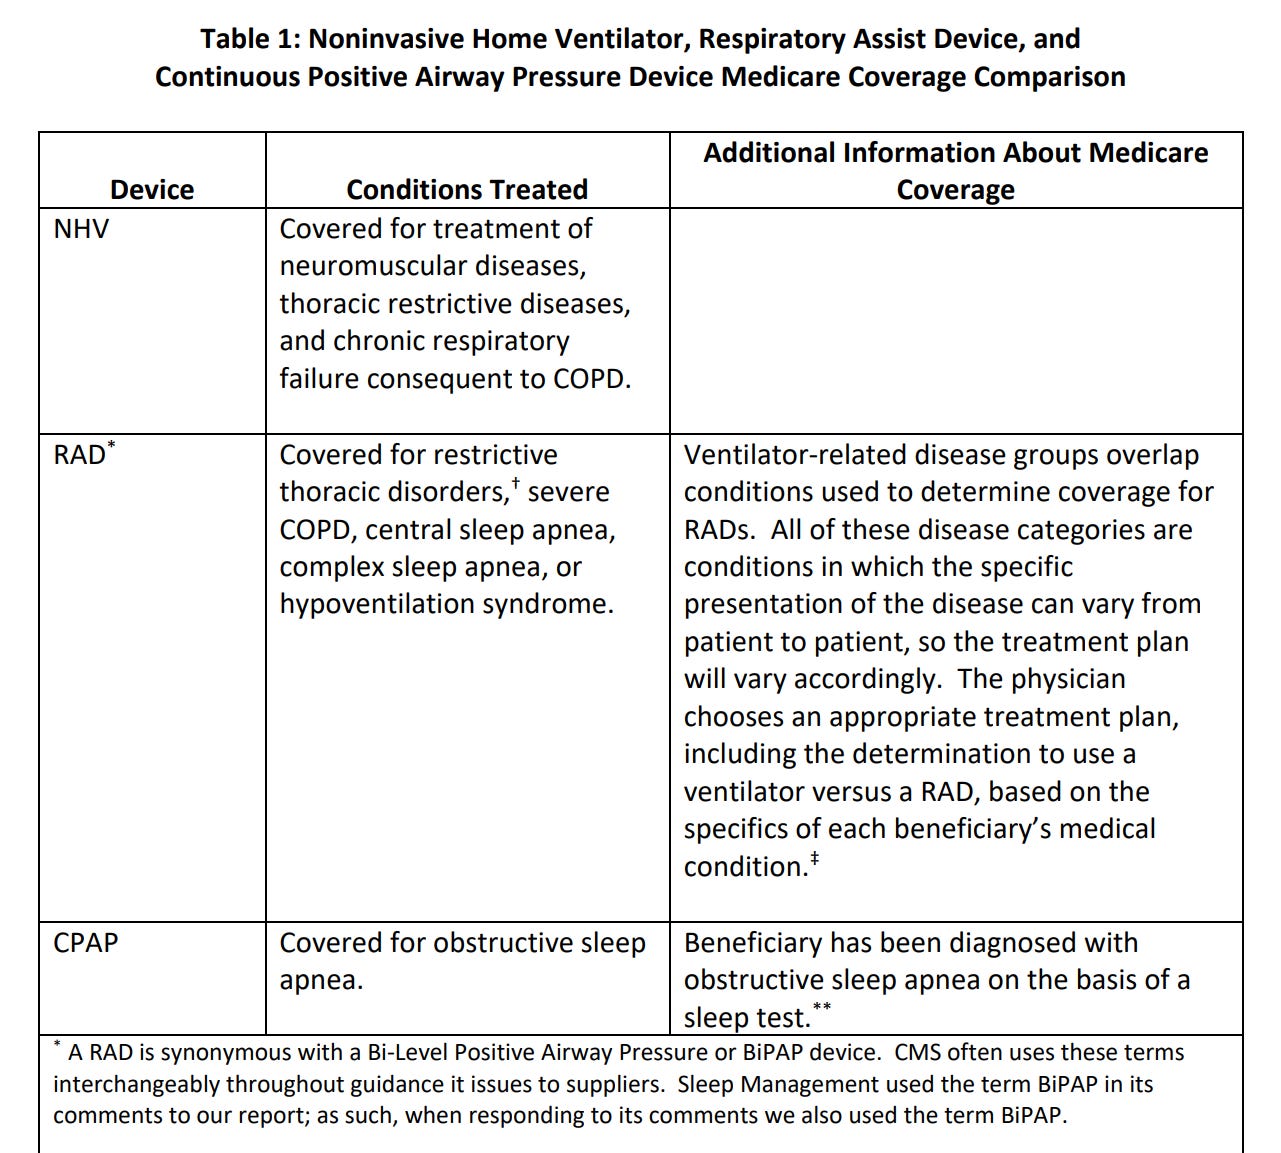 Table 1: Noninvasive Home Ventilator, Respiratory Assist Device, and 
Continuous Positive Airway Pressure Device Medicare Coverage Comparison 
Device 
NHV 
RAD• 
CPAP 
Conditions Treated 
Covered for treatment Of 
neuromuscular diseases, 
thoracic restrictive diseases, 
and chronic respiratory 
failure consequent to COPD. 
Covered for restrictive 
thoracic disorders,' severe 
COPD, central sleep apnea, 
complex sleep apnea, or 
hypoventilation syndrome. 
Additional Information About Medicare 
cove 
Ventilator-related disease groups overlap 
conditions used to determine coverage for 
RADS. All of these disease categories are 
conditions in which the specific 
presentation of the disease can vary from 
patient to patient, so the treatment plan 
will vary accordingly. The physician 
chooses an appropriate treatment plan, 
including the determination to use a 
ventilator versus a RAD, based on the 
specifics of each beneficiary's medical 
condition. 
Covered for obstructive sleep Beneficiary has been diagnosed with 
apnea. 
Obstructive sleep apnea on the basis Of a 
slee test. 
• A RAD is synonymous with a Bi-level Positive Airway Pressure or BiPAP device. CMS often uses these terms 
interchangeably throughout guidance it issues to suppliers. Sleep Management used the term BiPAP in its 
comments to Our report; as such, when responding to its comments we also used the term BiPAP. 